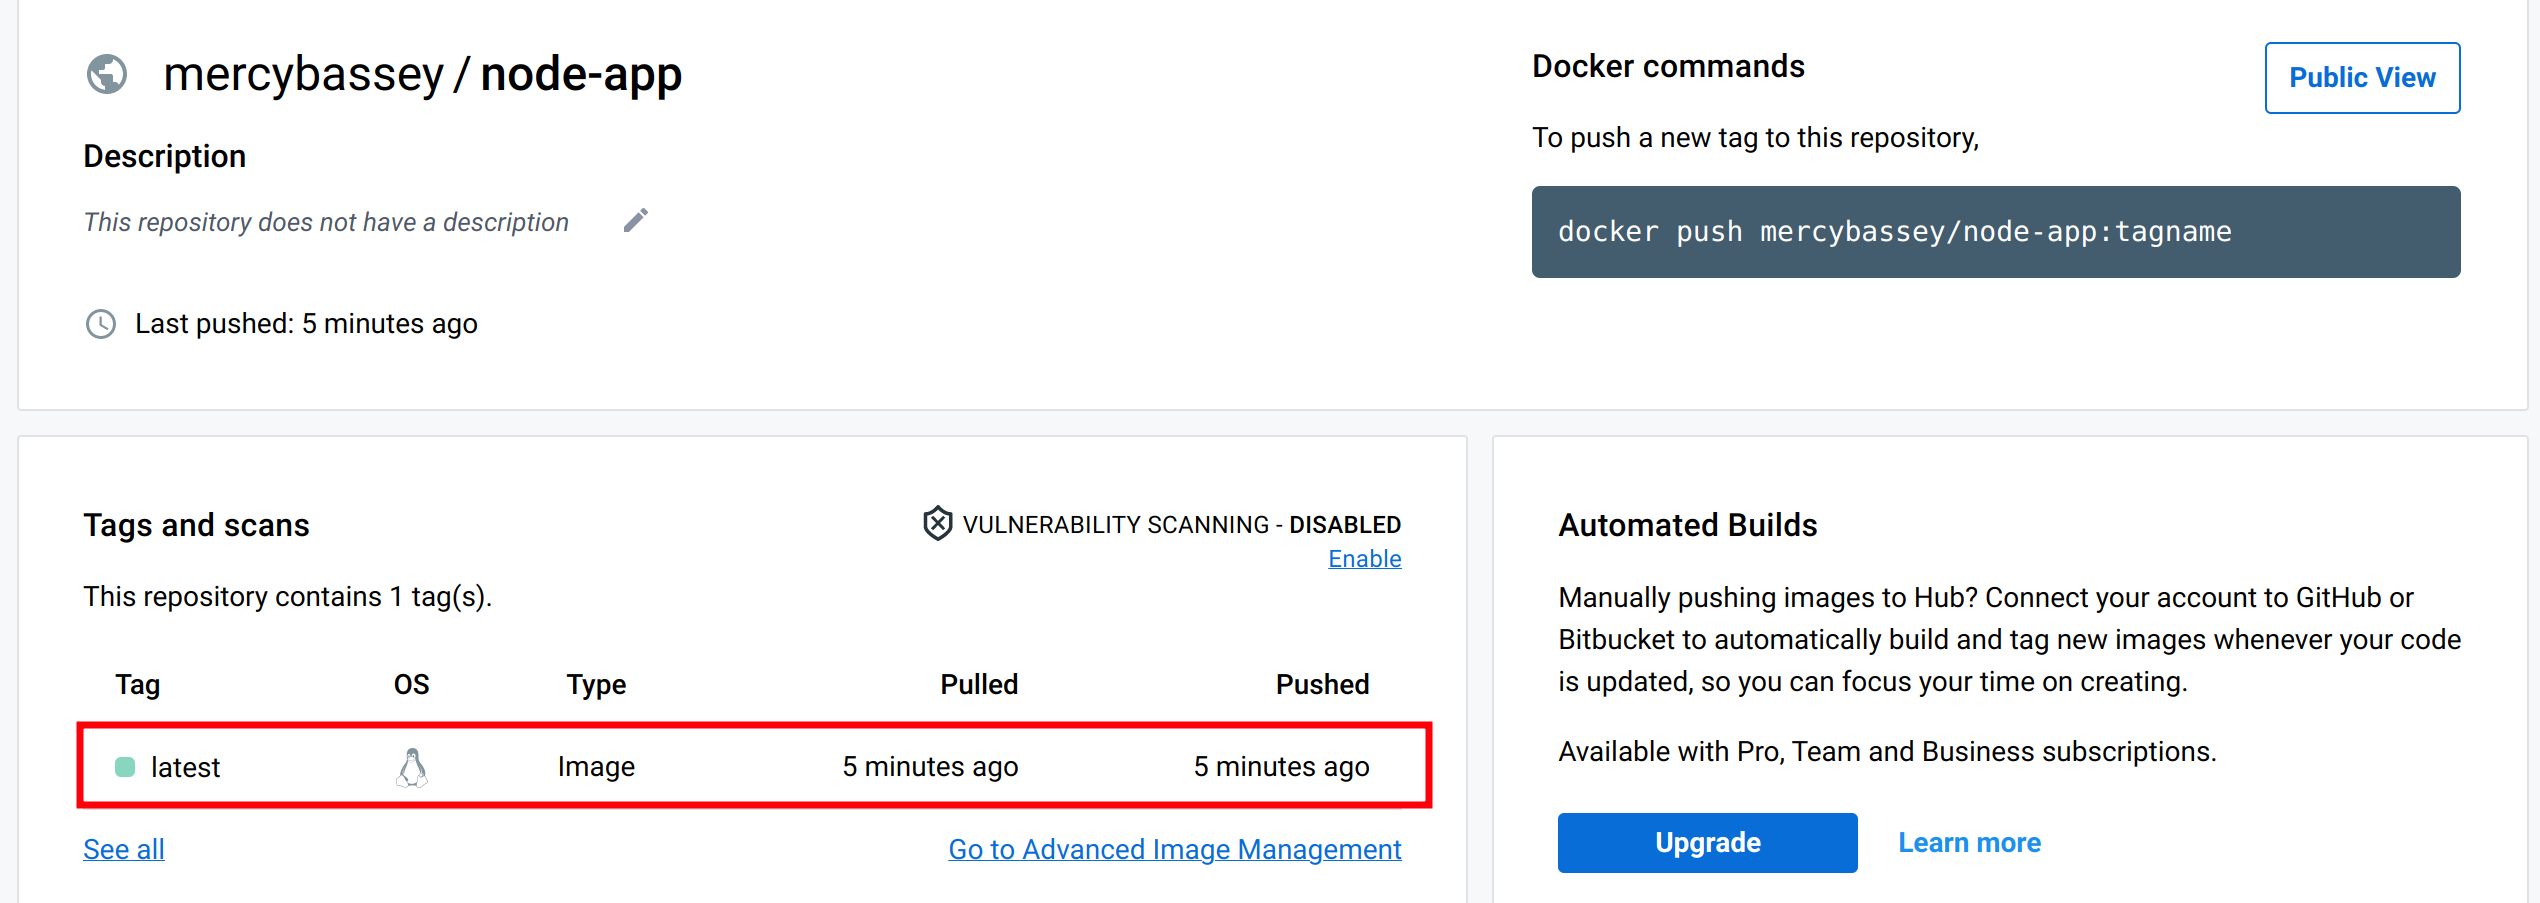 Verifying the image was pushed successfully to the Docker Hub repository